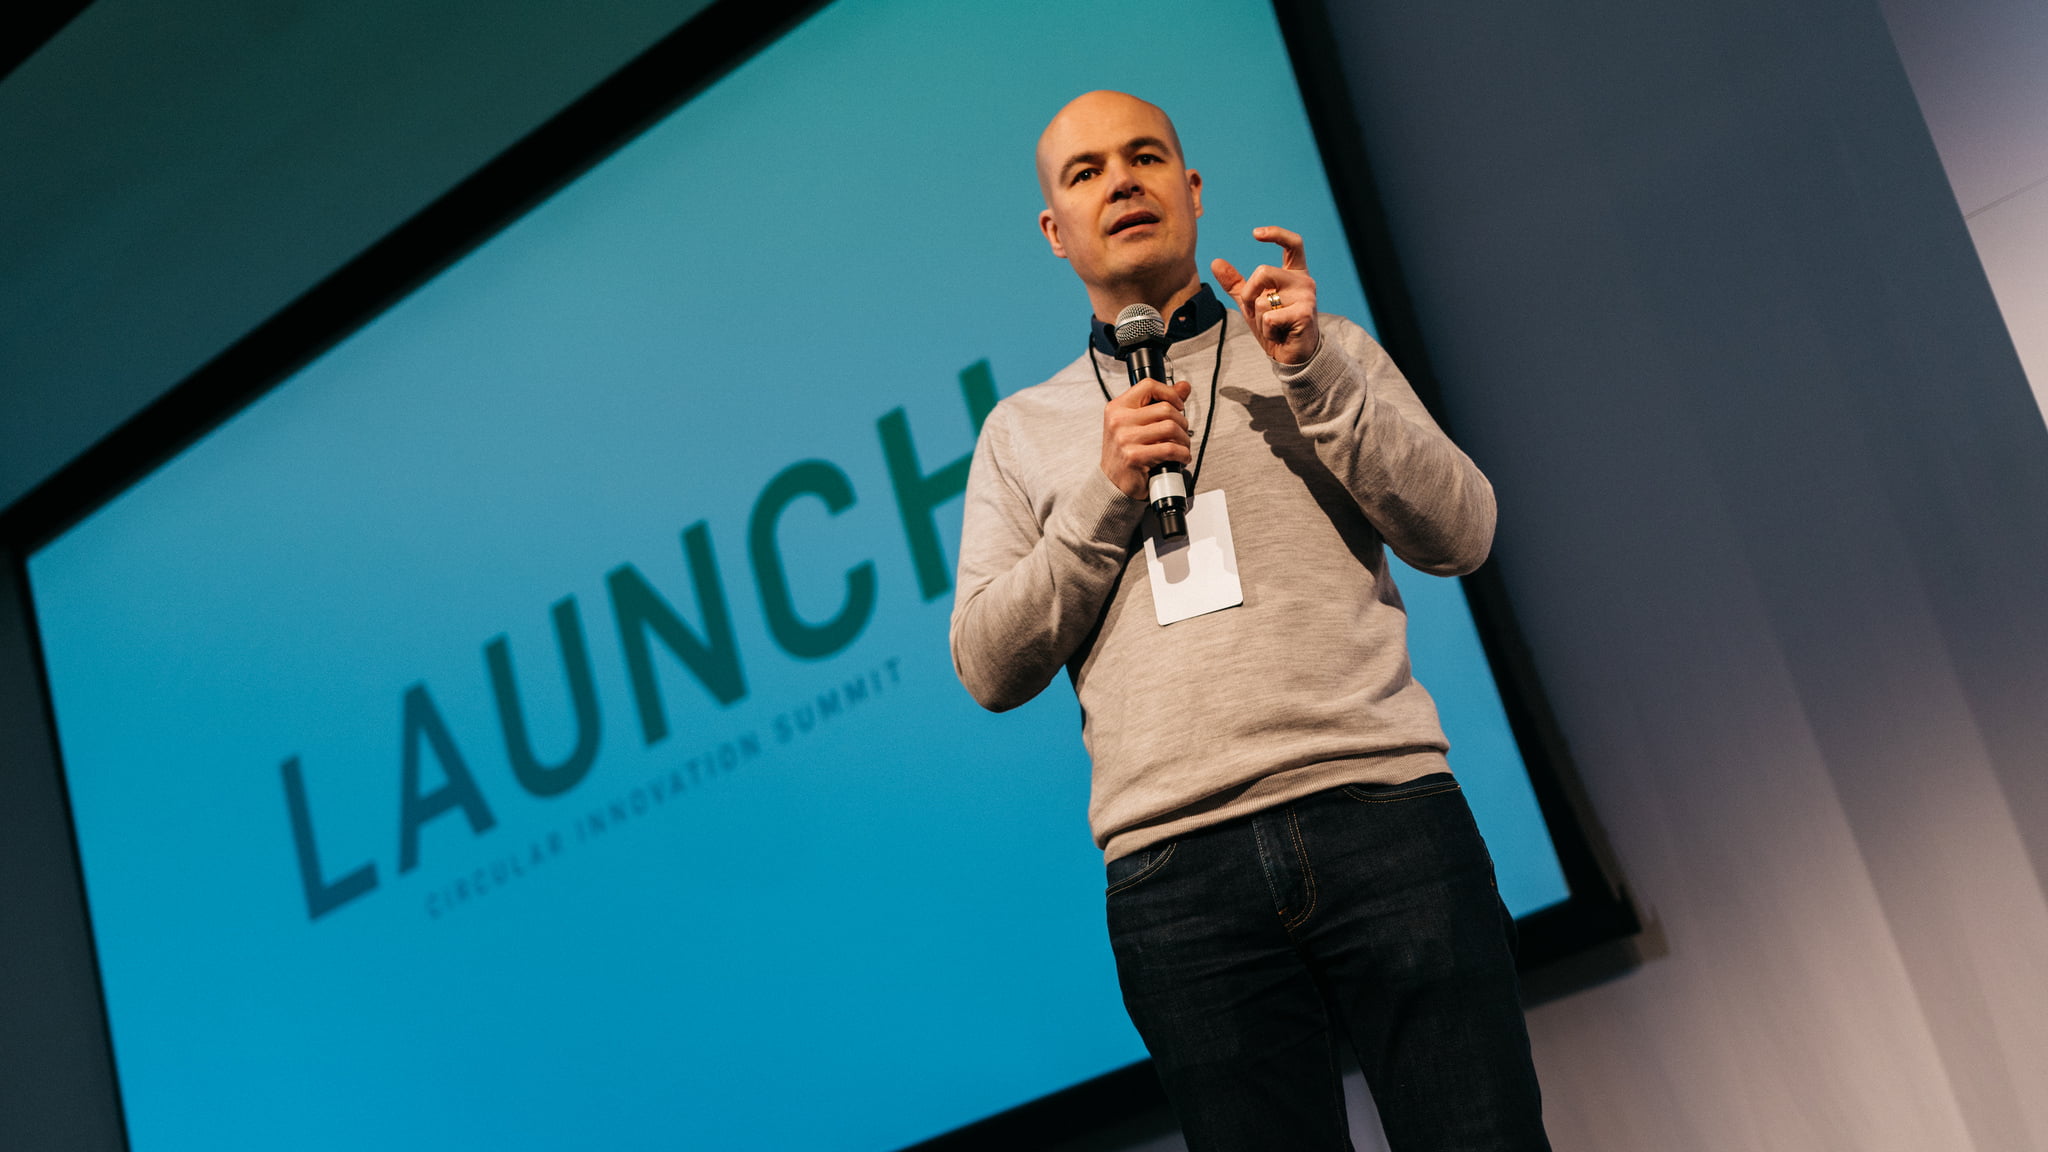 LAUNCH propels startups to $150 million in investment